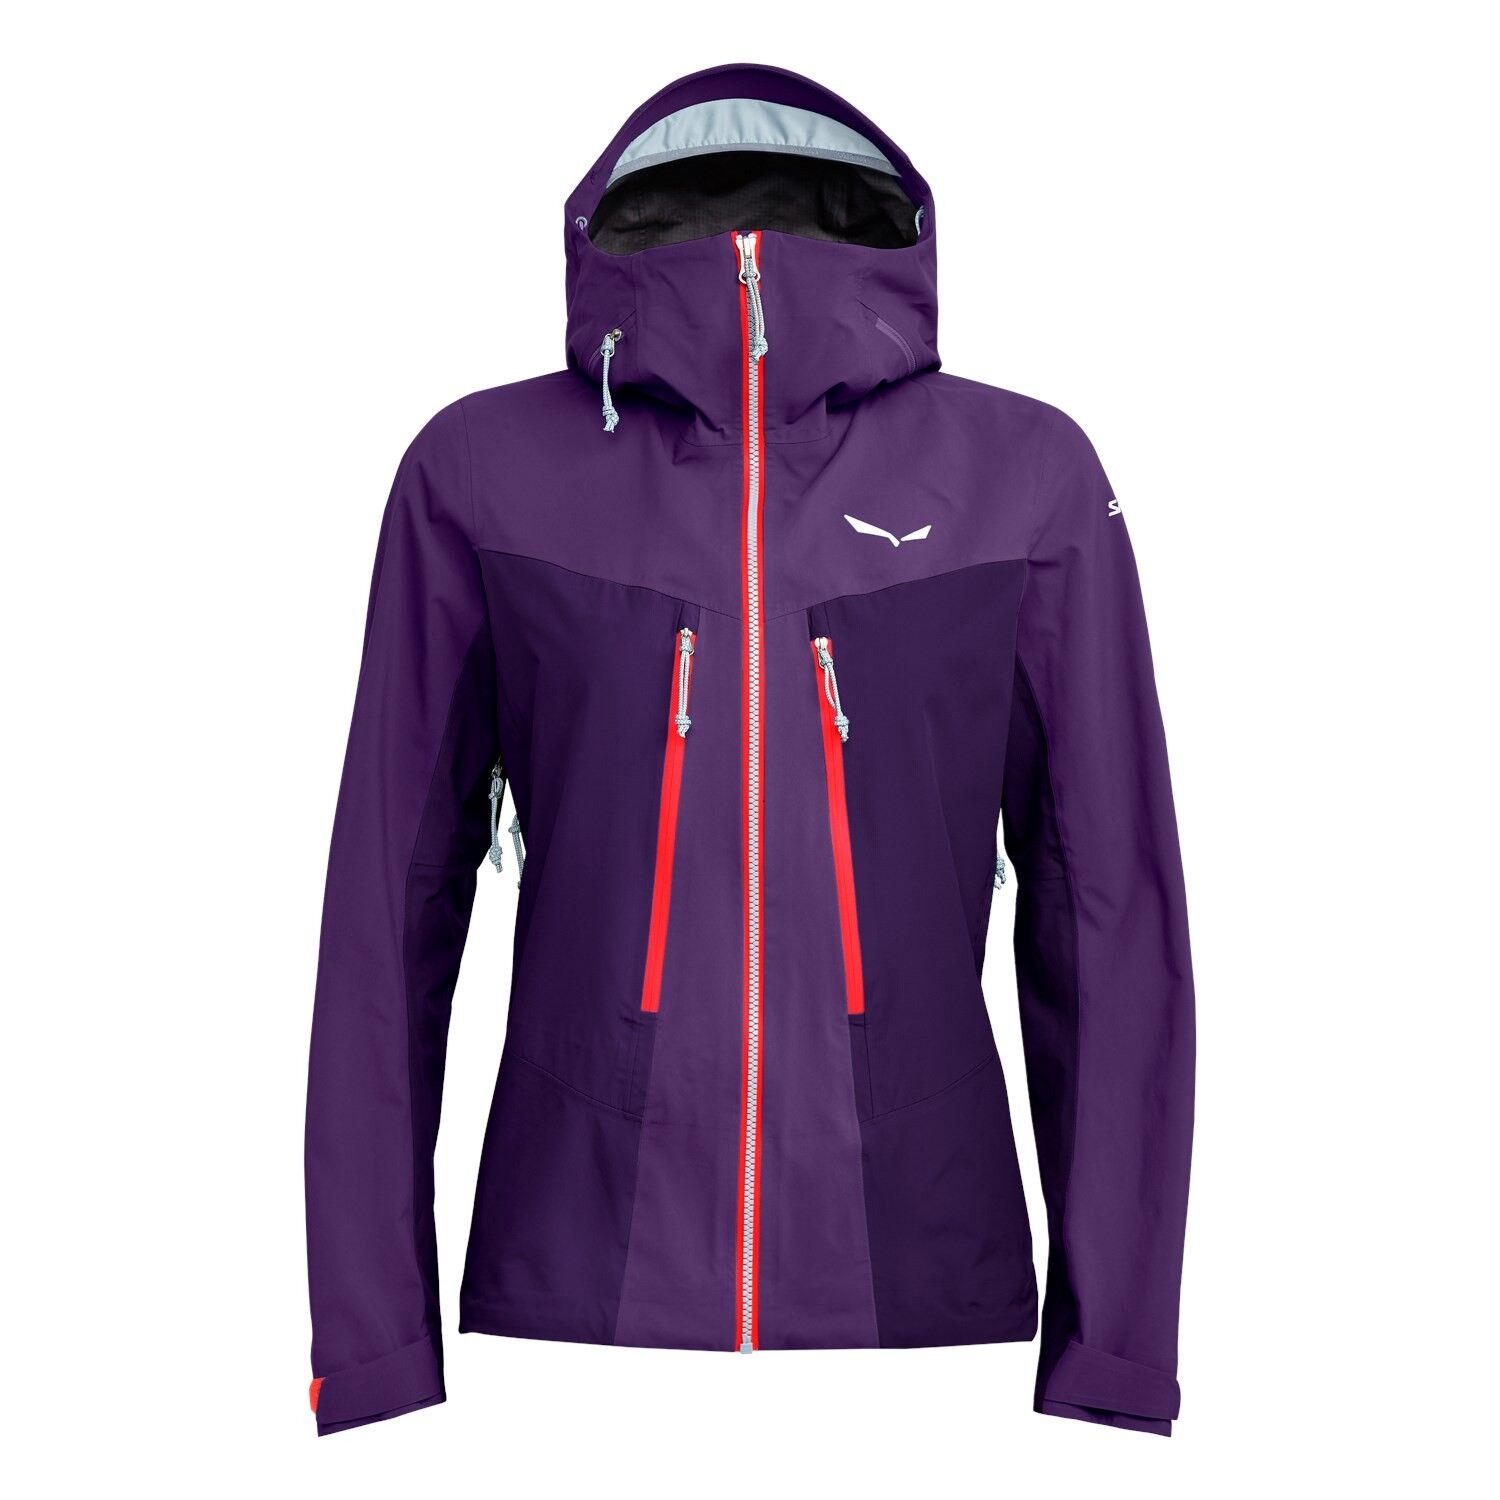 Salewa Ortles 3 GTX Pro - Chaqueta impermeable - Mujer